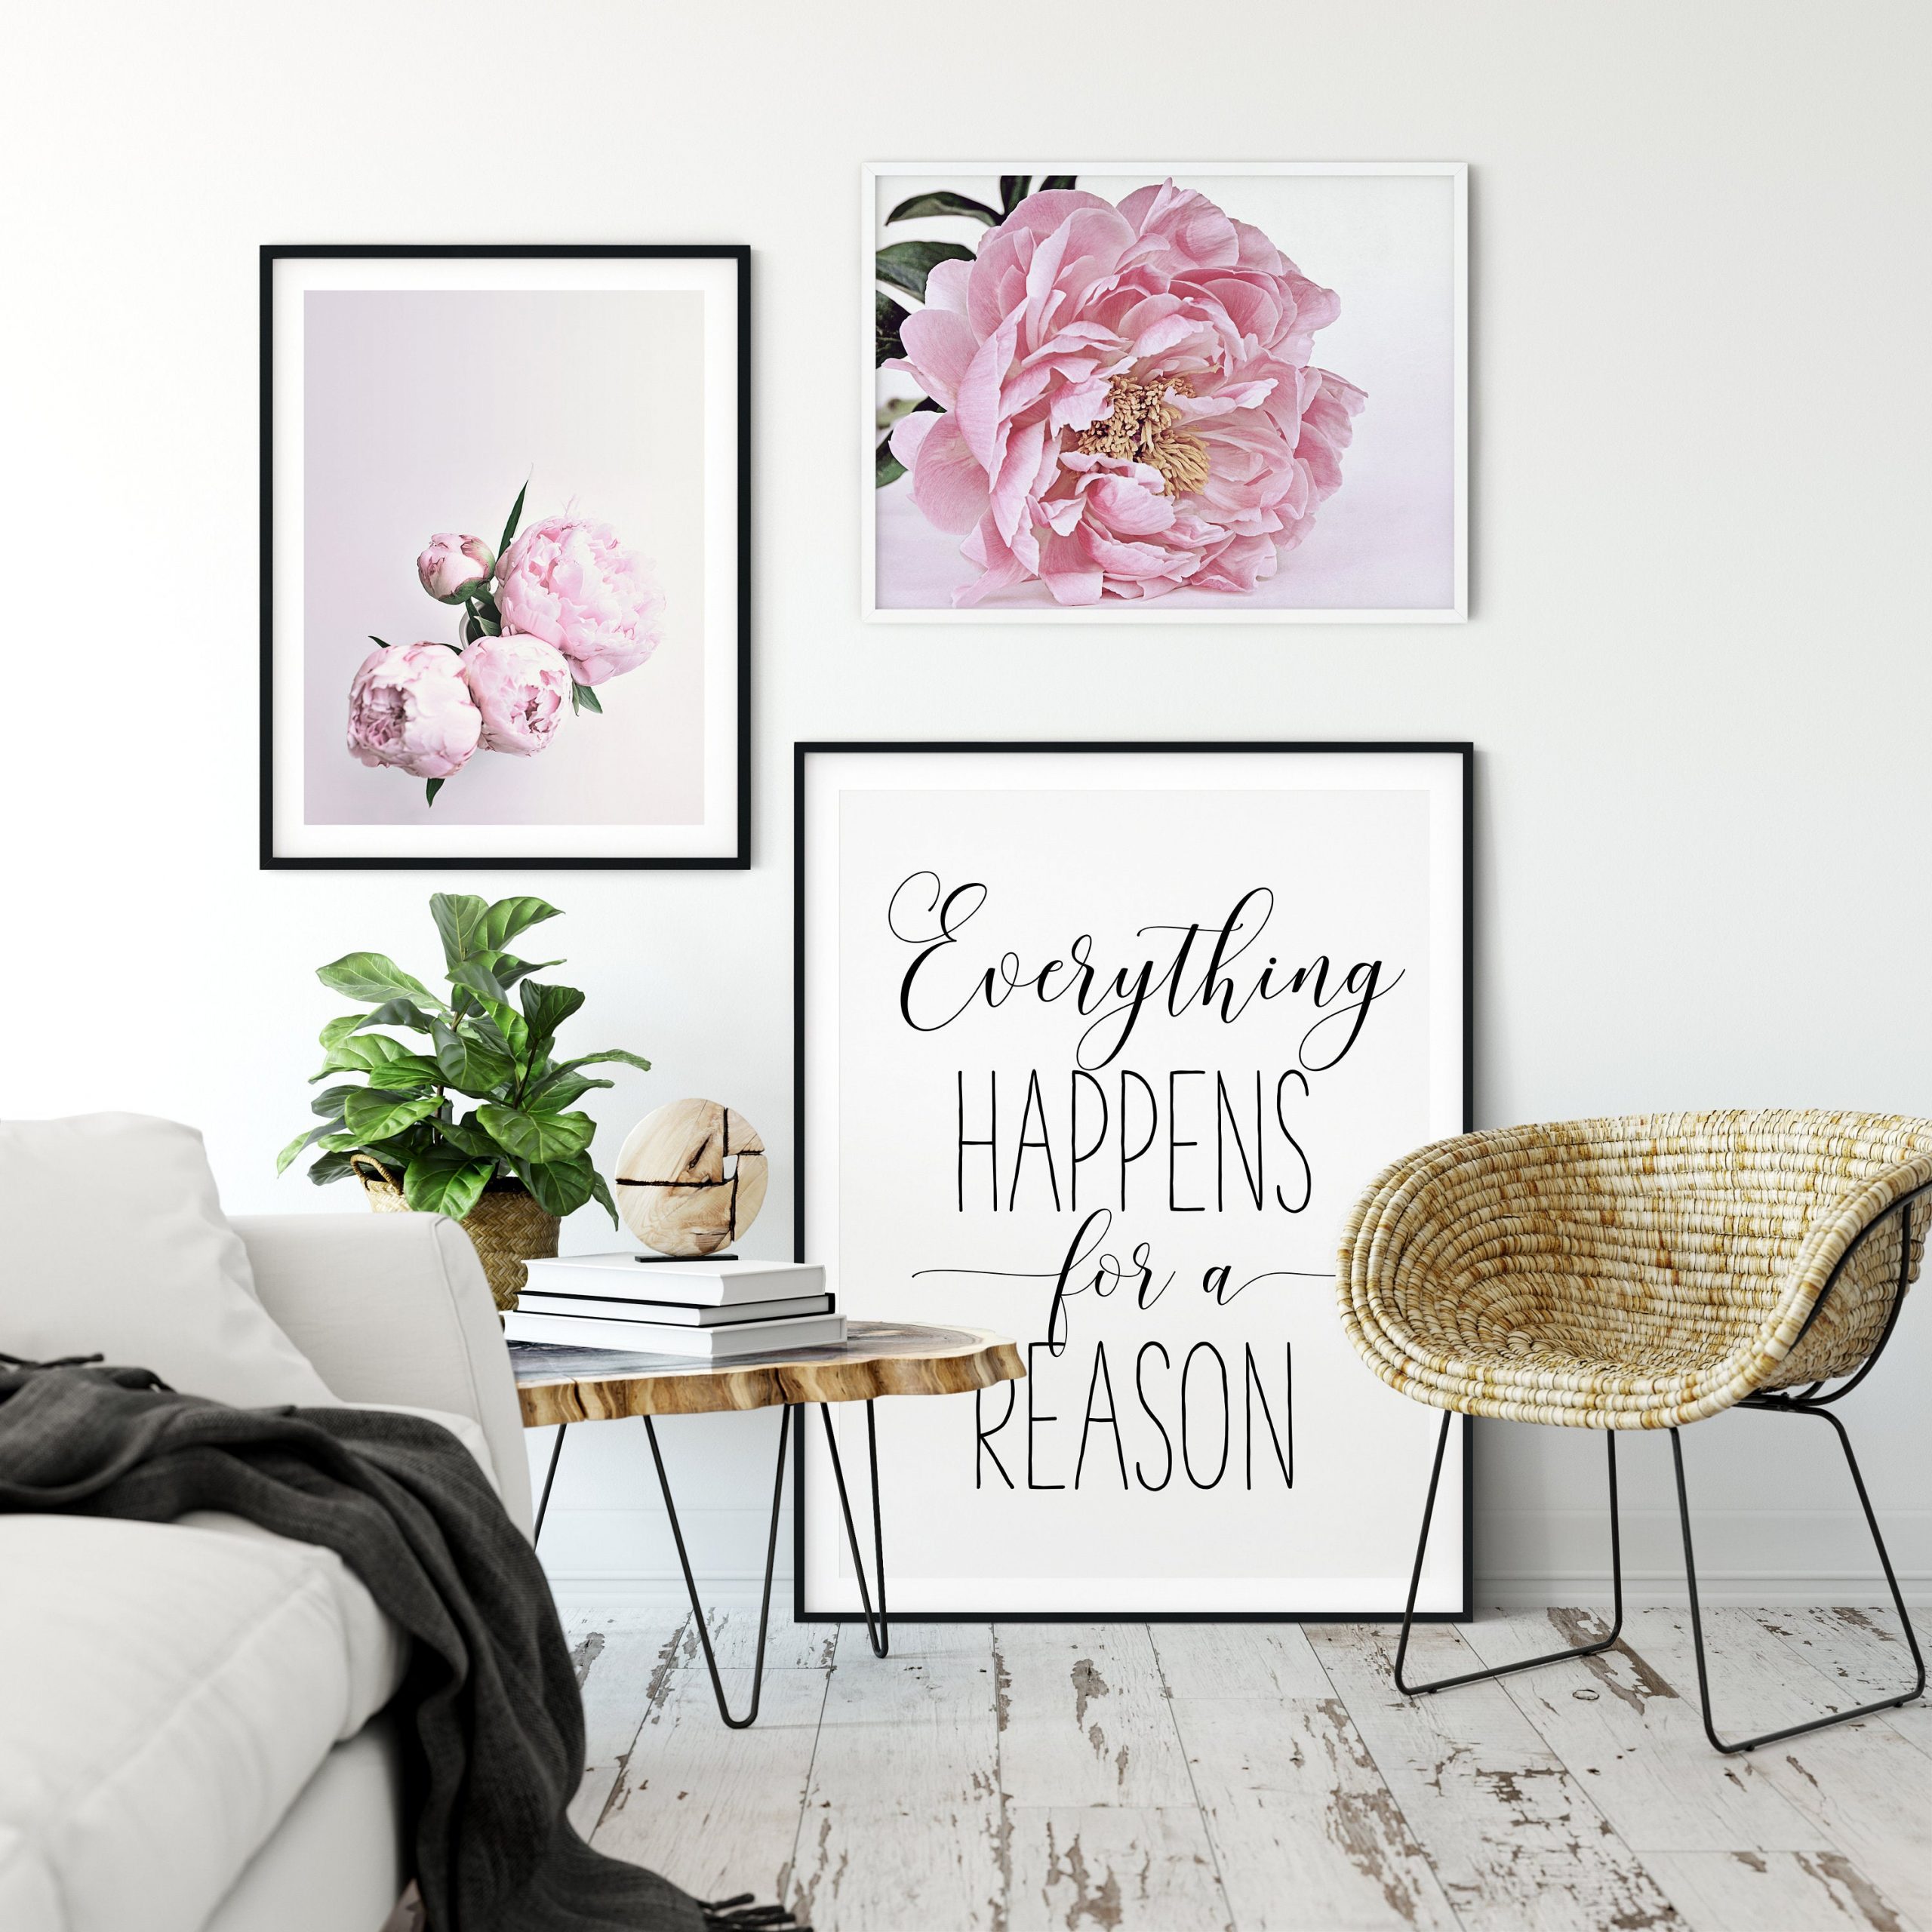 Everything Happens For A Reason,Nursery Printable Decor,Inspirational Quotes